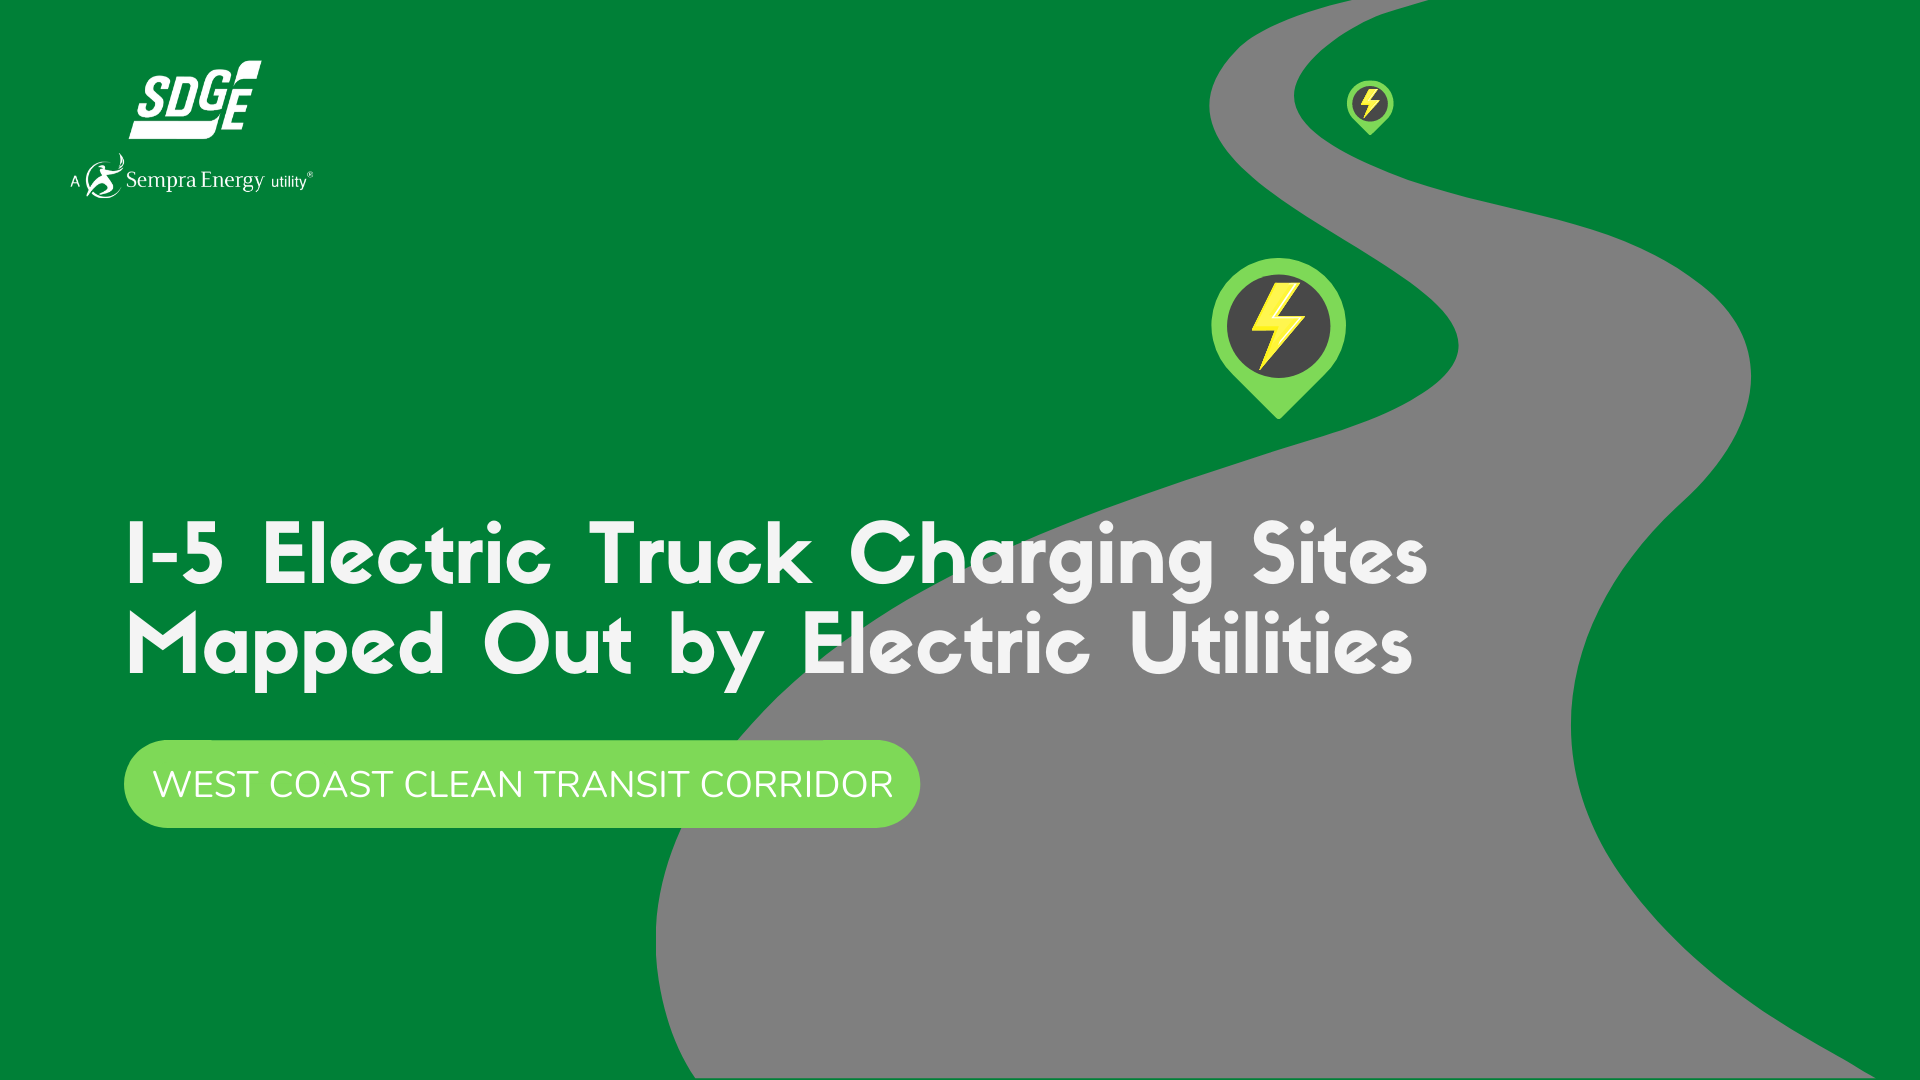 I-5 Electric Truck Charging Sites Mapped Out by Electric Utilities